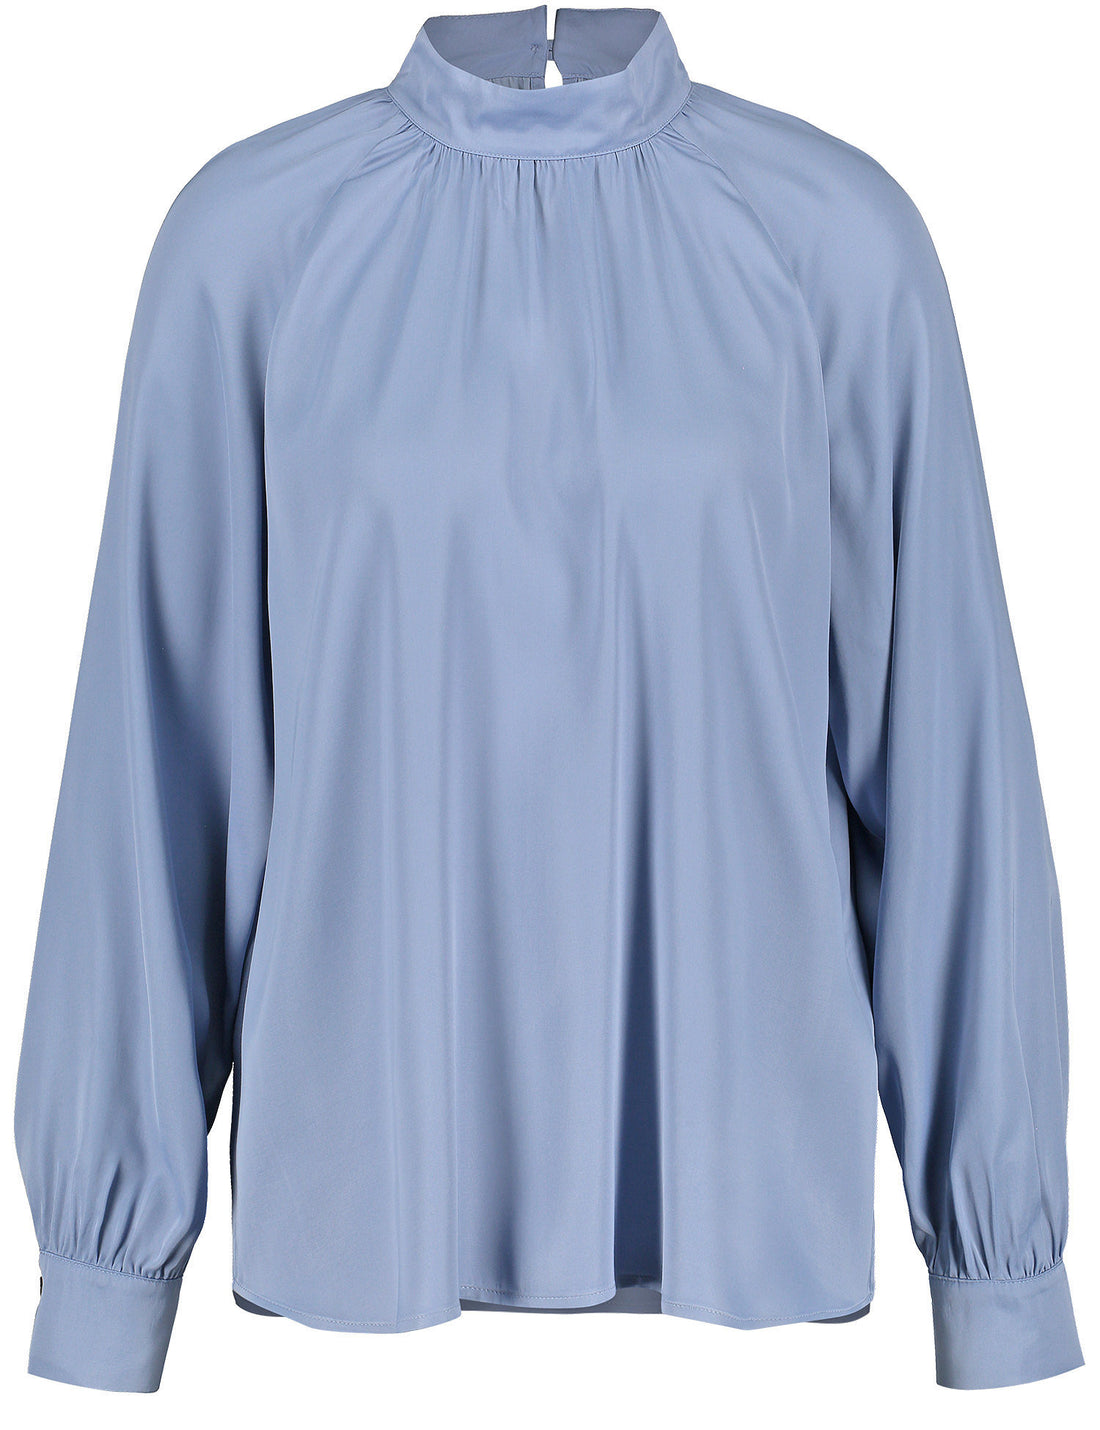 Blouse With A Stand-Up Collar_260016-31410_80191_01